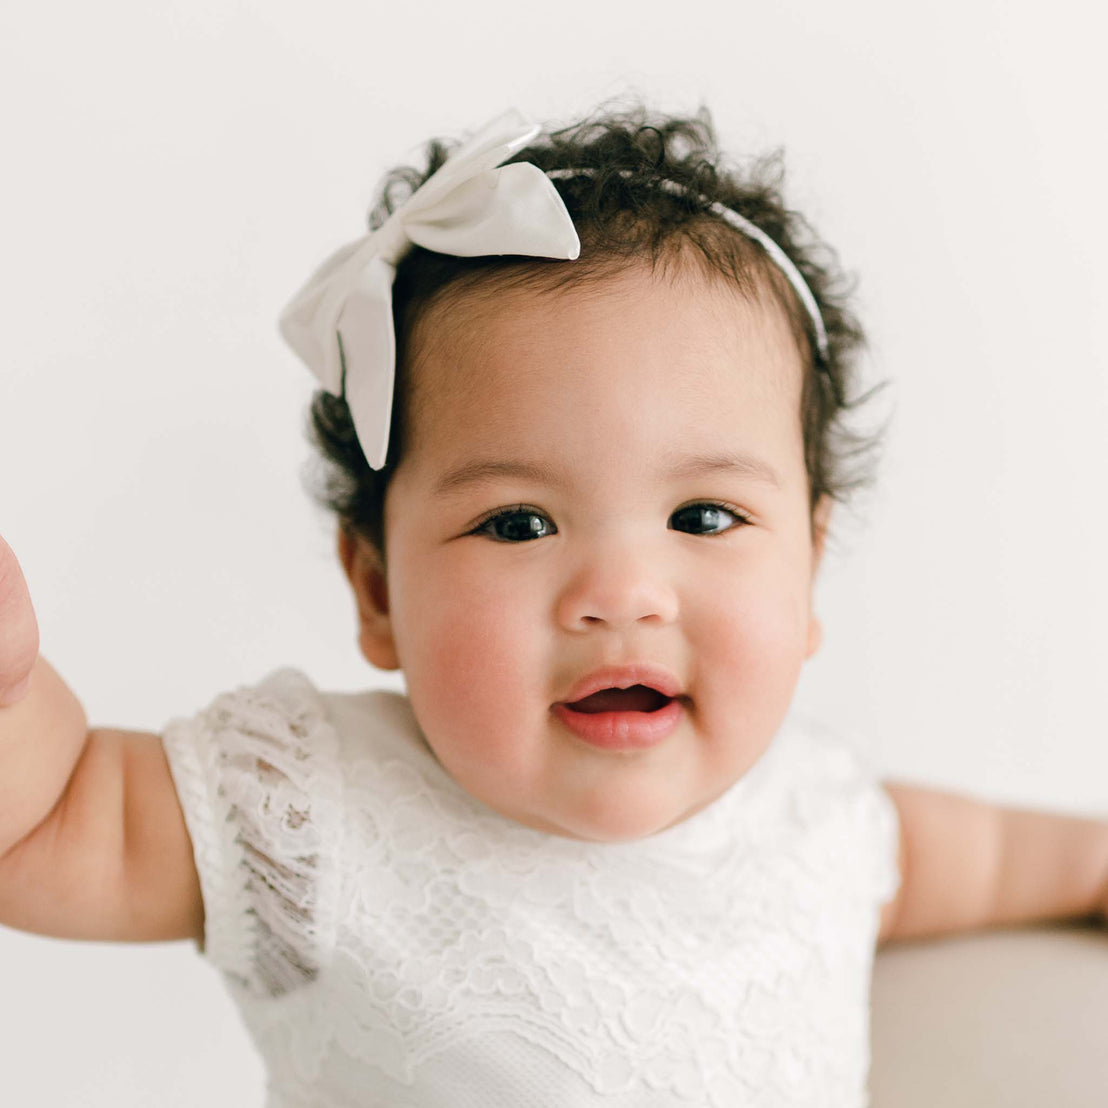 A baby girl with curly hair and a Victoria Silk Bow Headband smiles joyfully, wearing a lacey white dress against a clean, light background.